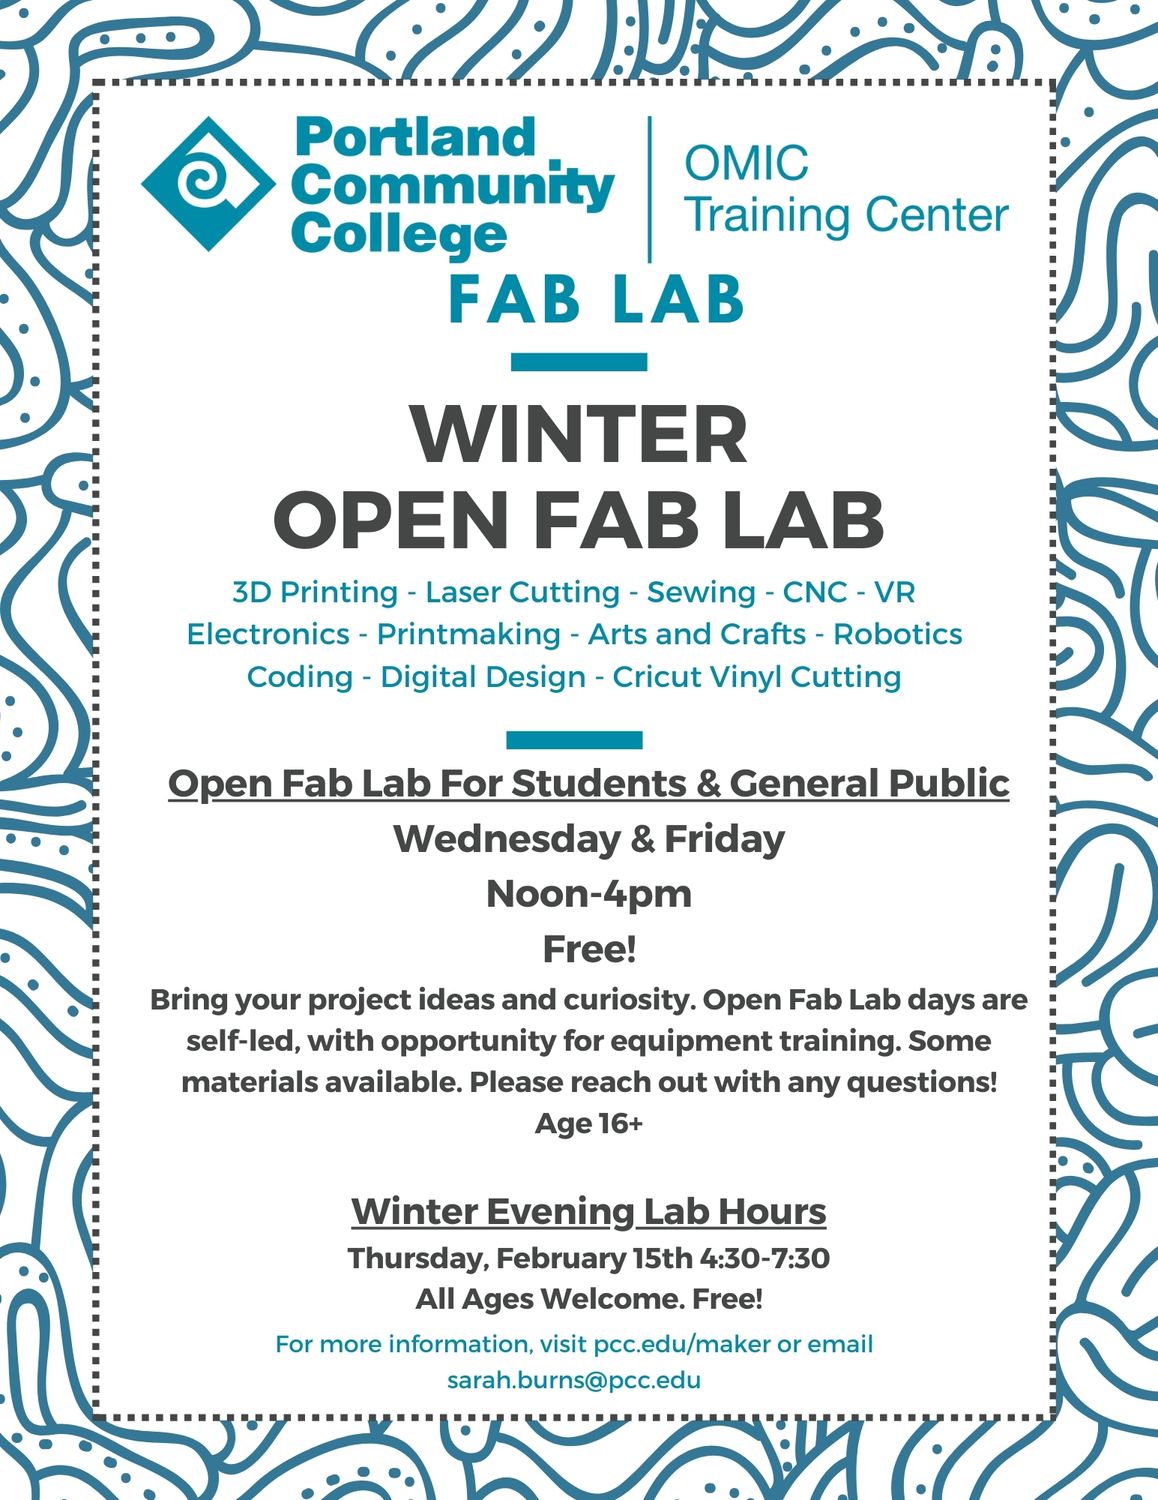 OMIC Training Center
Fab Lab
Winter Open Fab Lab
3D Printing - Laser Cutting - Sewing - CNC - VR
Electronics - Printmaking - Arts and Crafts - Robotics
Coding - Digital Design - Cricut Vinyl Cutting
Open Fab Lab For Students & General Public
Wednesday & Friday
12:00 - 4:00 PM
Free!
Bring your project ideas and curiosity. Open Fab Lab days are
self-led, with opportunity for equipment training. Some
materials available. Please reach out with any questions!

Age 16+
Winter Evening Lab Hours
Thursday, February 15th 4:30-7:30
All Ages Welcome. Free!
For more information, visit pcc.edu/maker or email sarah.burns@pcc.edu